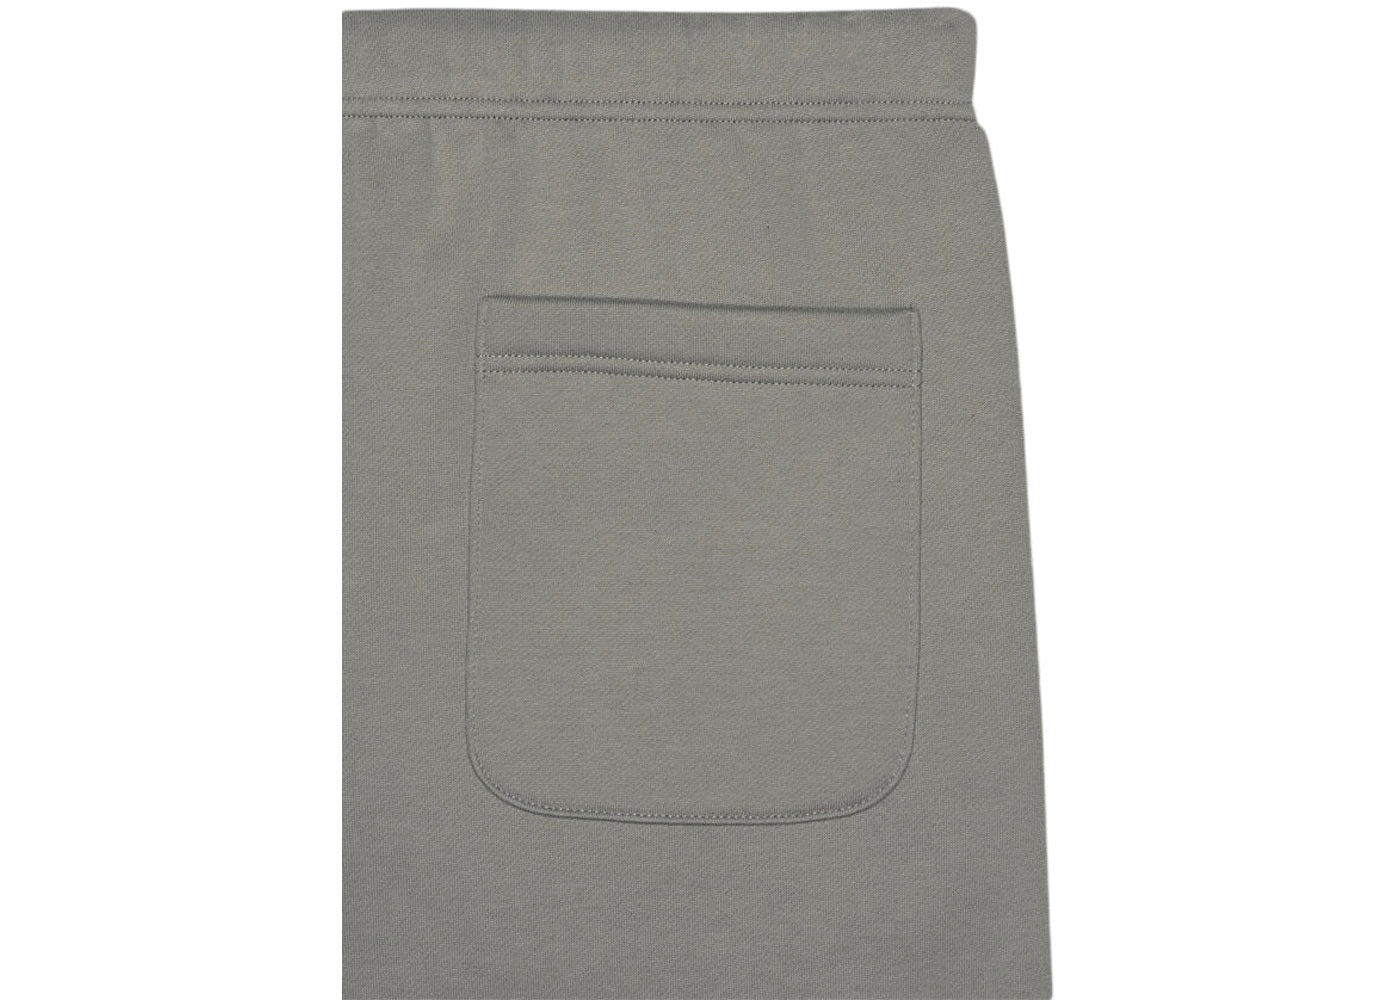 FEAR OF GOD ESSENTIALS SWEATPANTS CEMENT